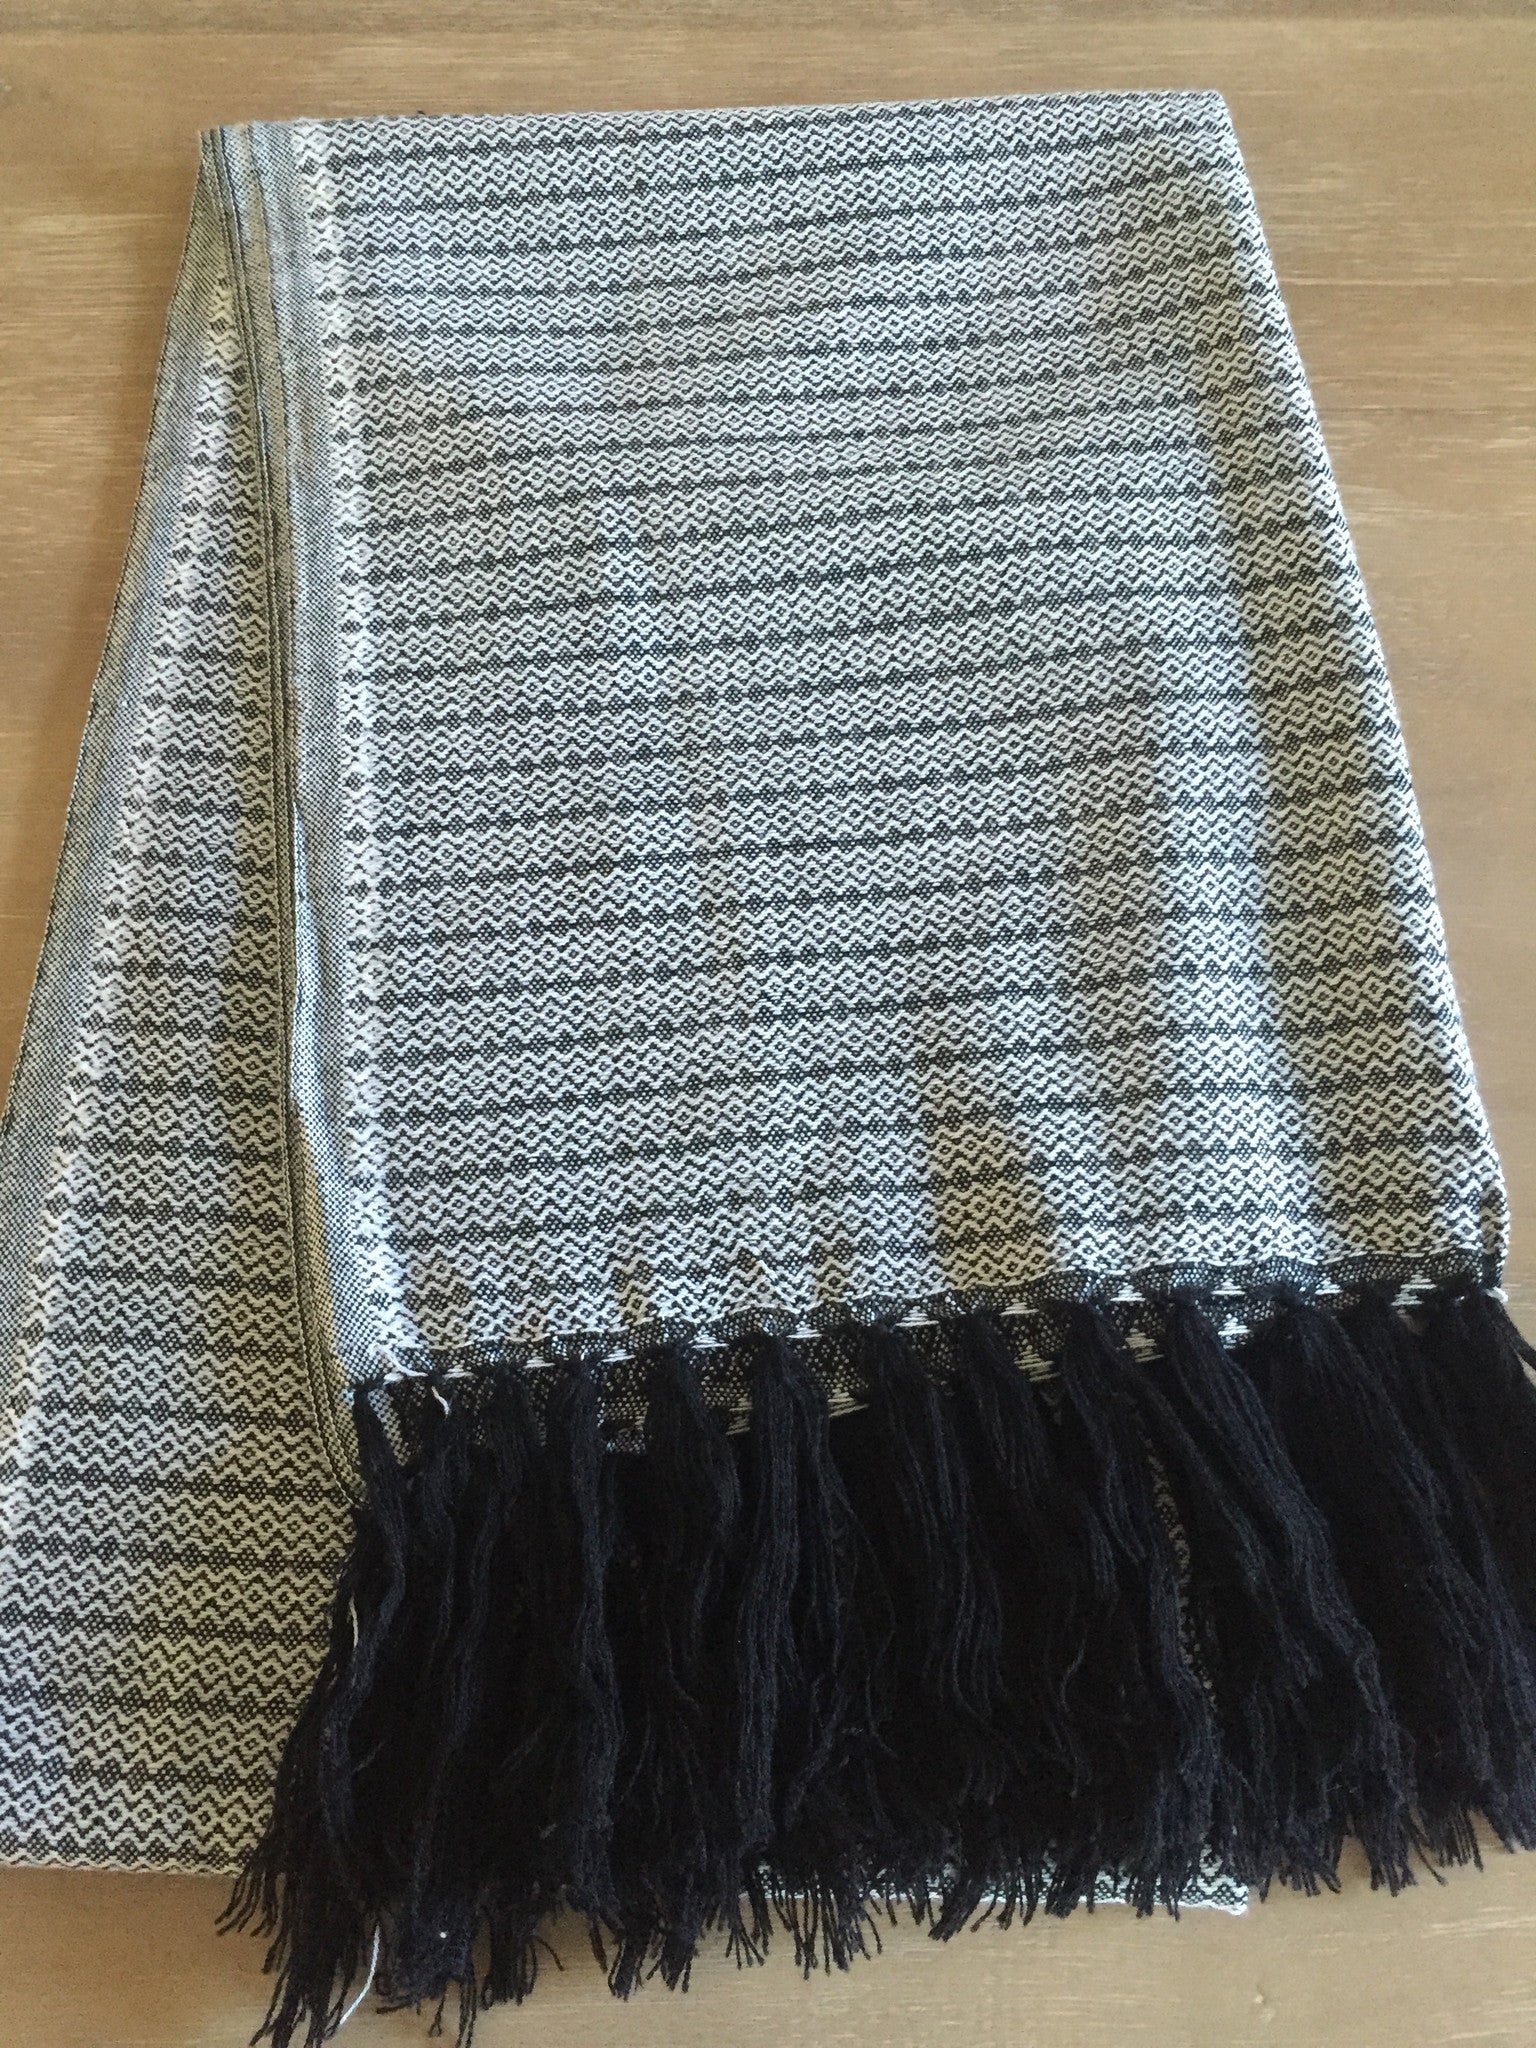 Mexican Rebozo Handwoven black and white with Fringes - MesaChic - 2